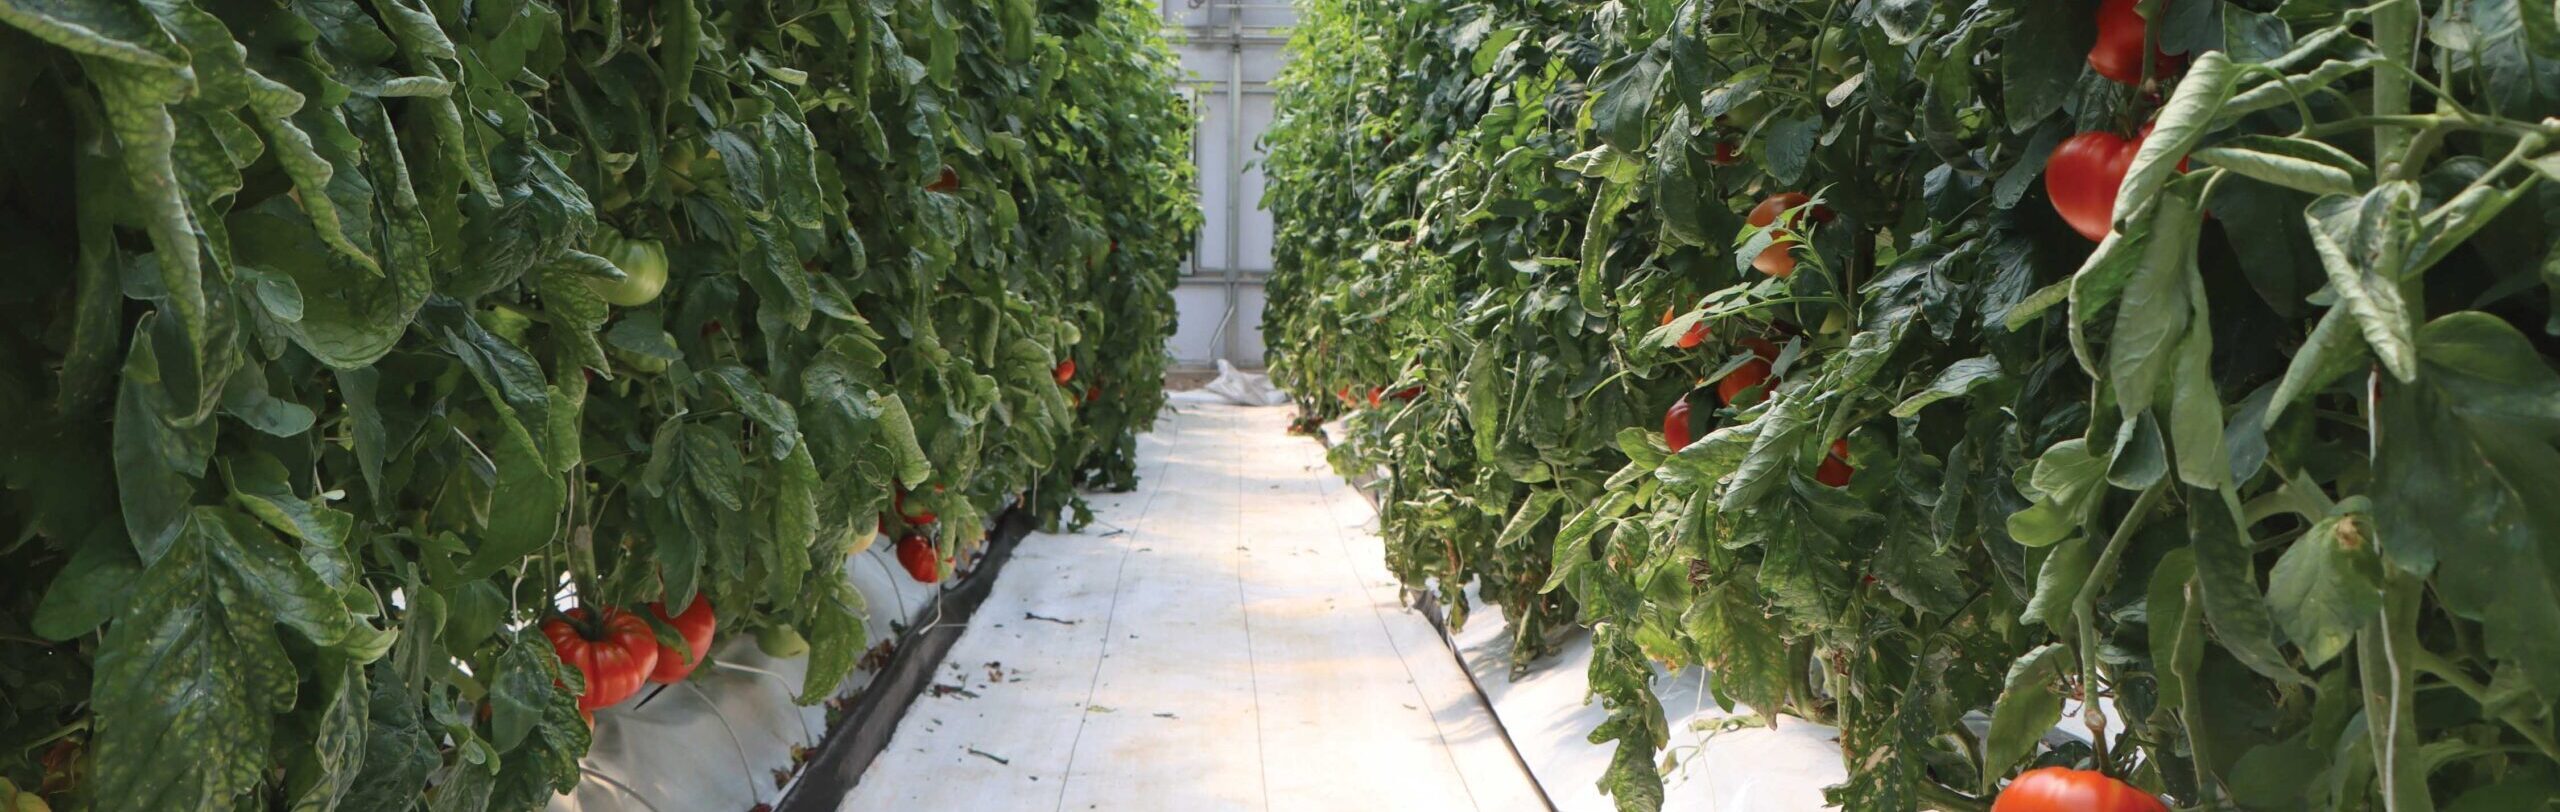 rows of tomato plants inside a greenhouse